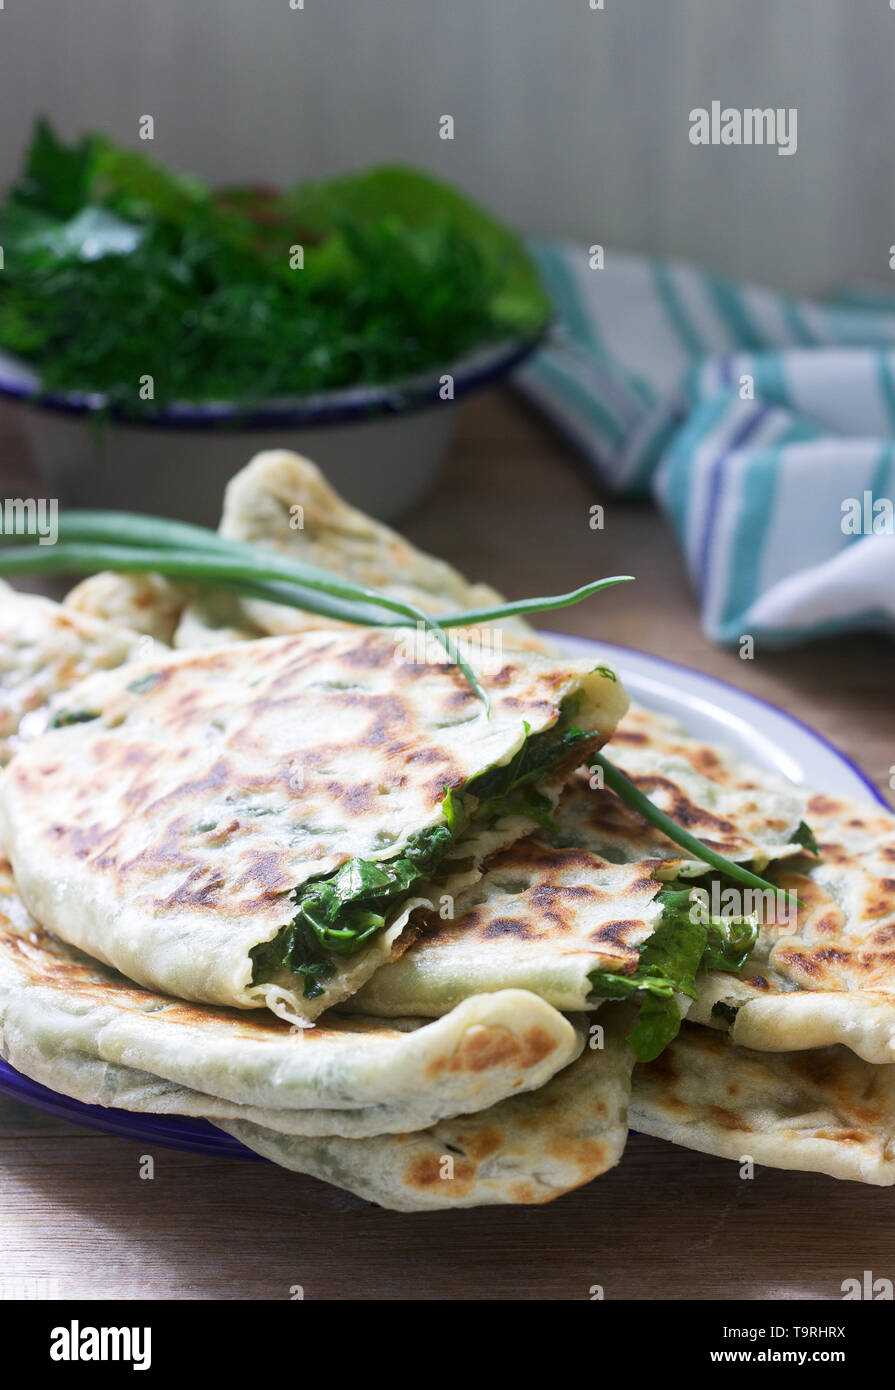 Baker making traditional dish of Armenians from Artsakh Zhingyalov hats is  a type of flatbread stuffed with finely diced herbs and green vegetables. S  Stock Photo - Alamy